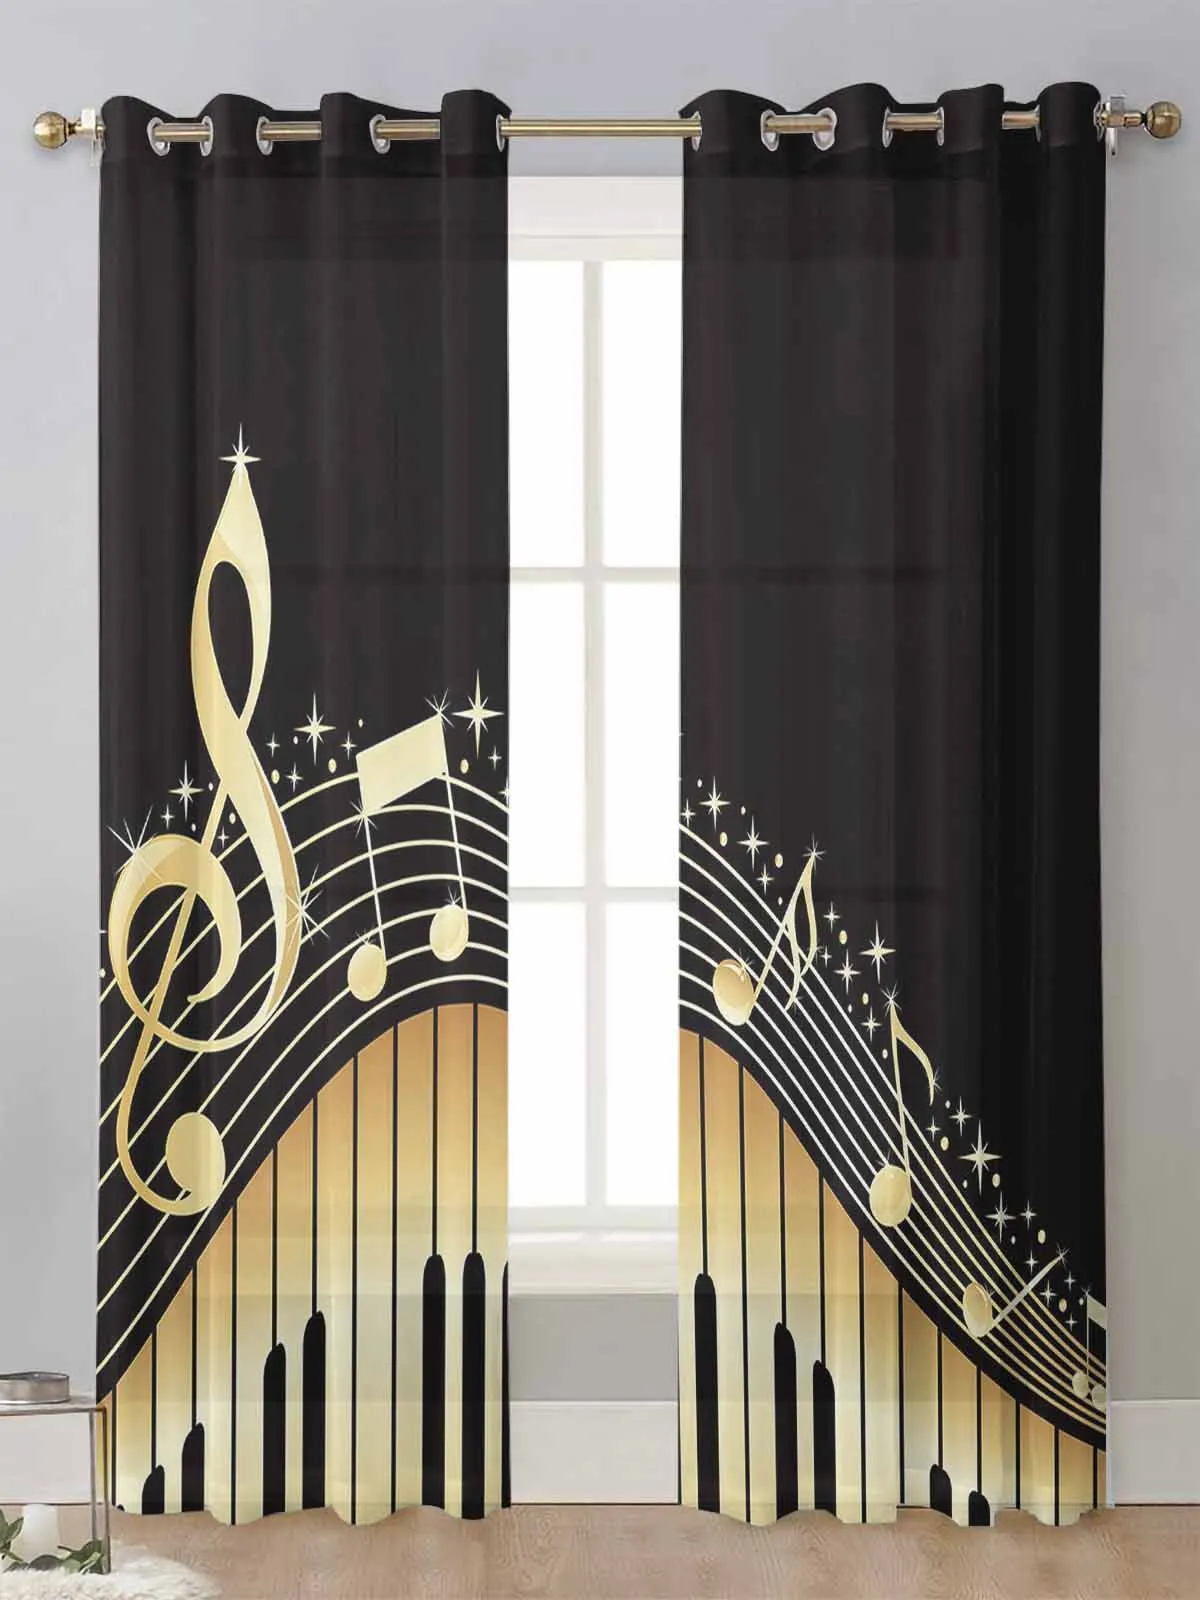 

Piano Keys Note Music Gradient Sheer Curtains For Living Room Window Transparent Voile Tulle Curtain Cortinas Drapes Home Decor